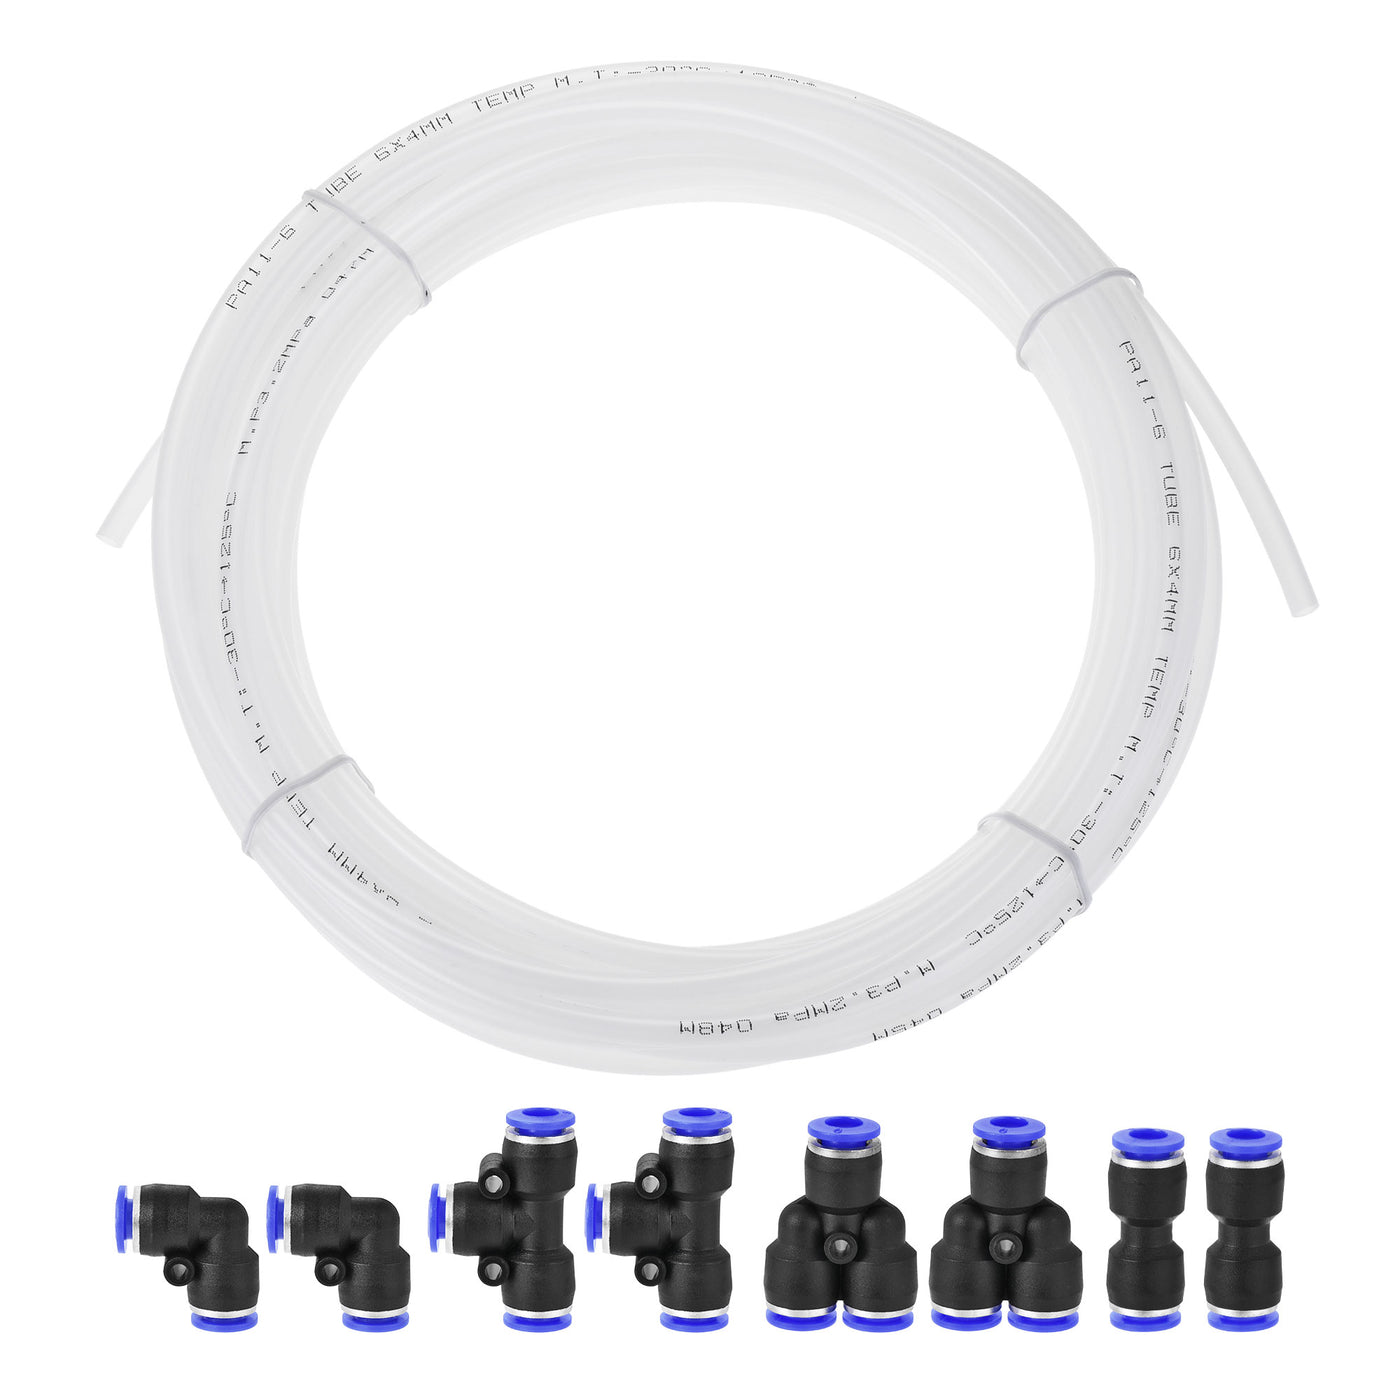 uxcell Uxcell Pneumatic 6mm OD Nylon Air Hose Tubing Kit 10 Meters White with 8 Pcs Push to Connect Fittings